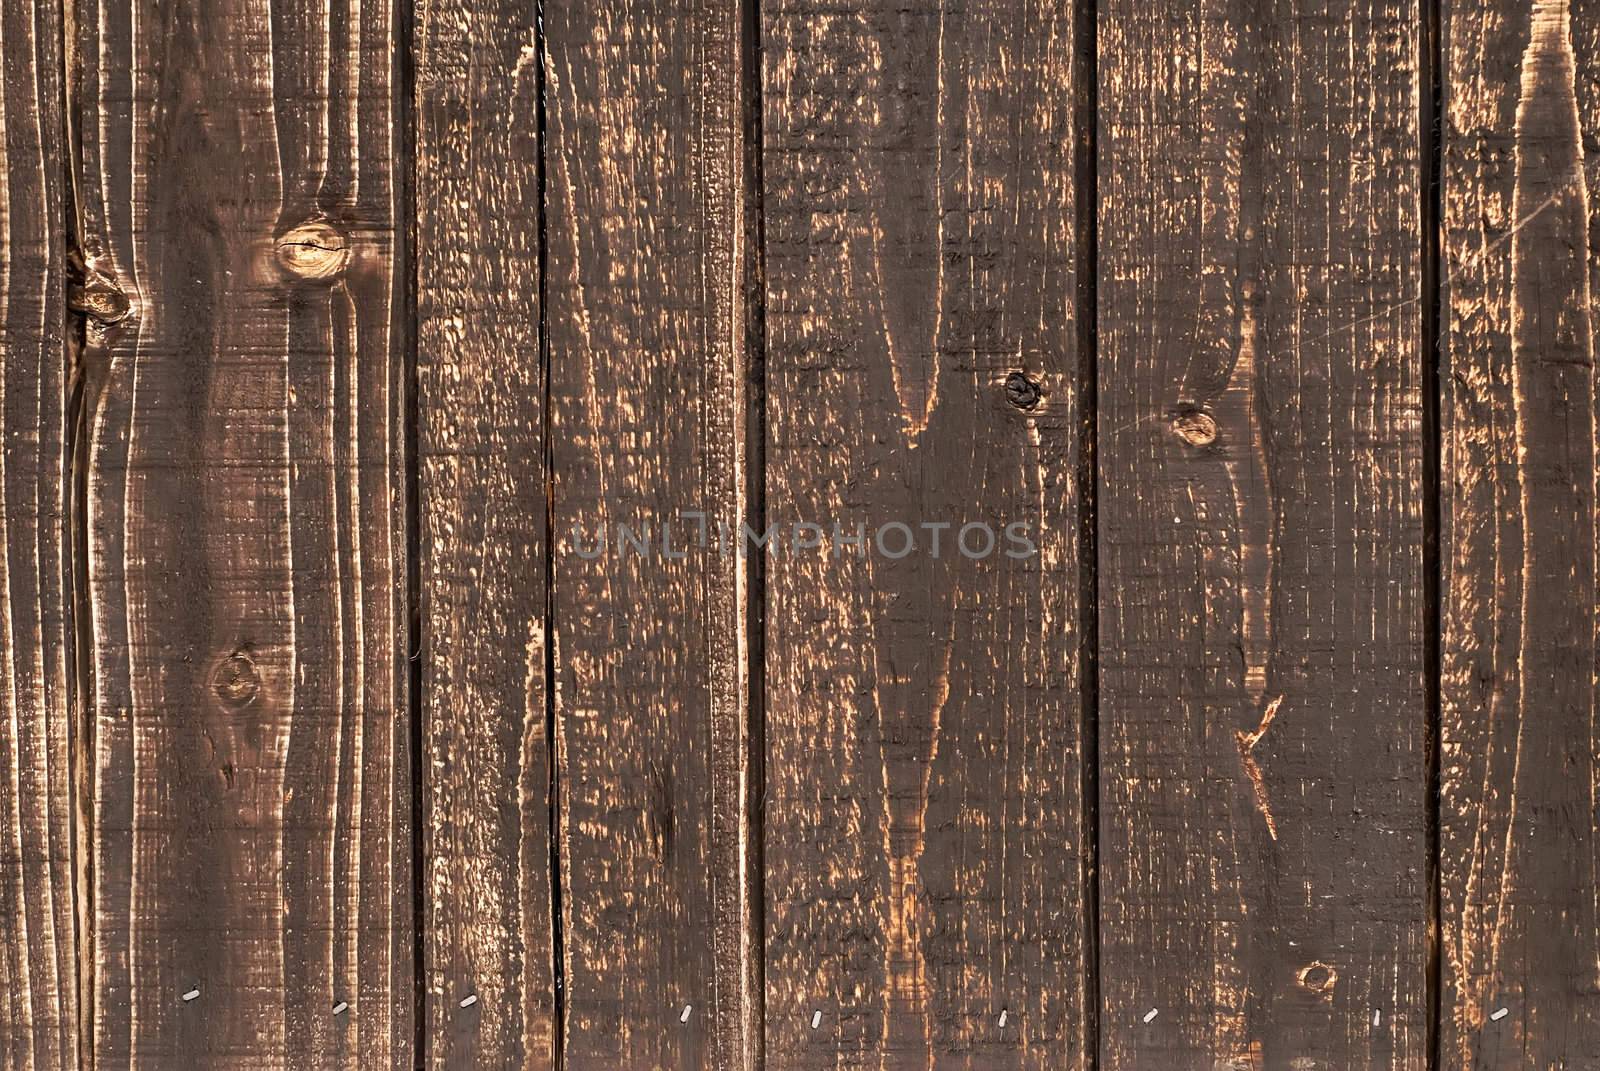 It is an old and brown wood wall.